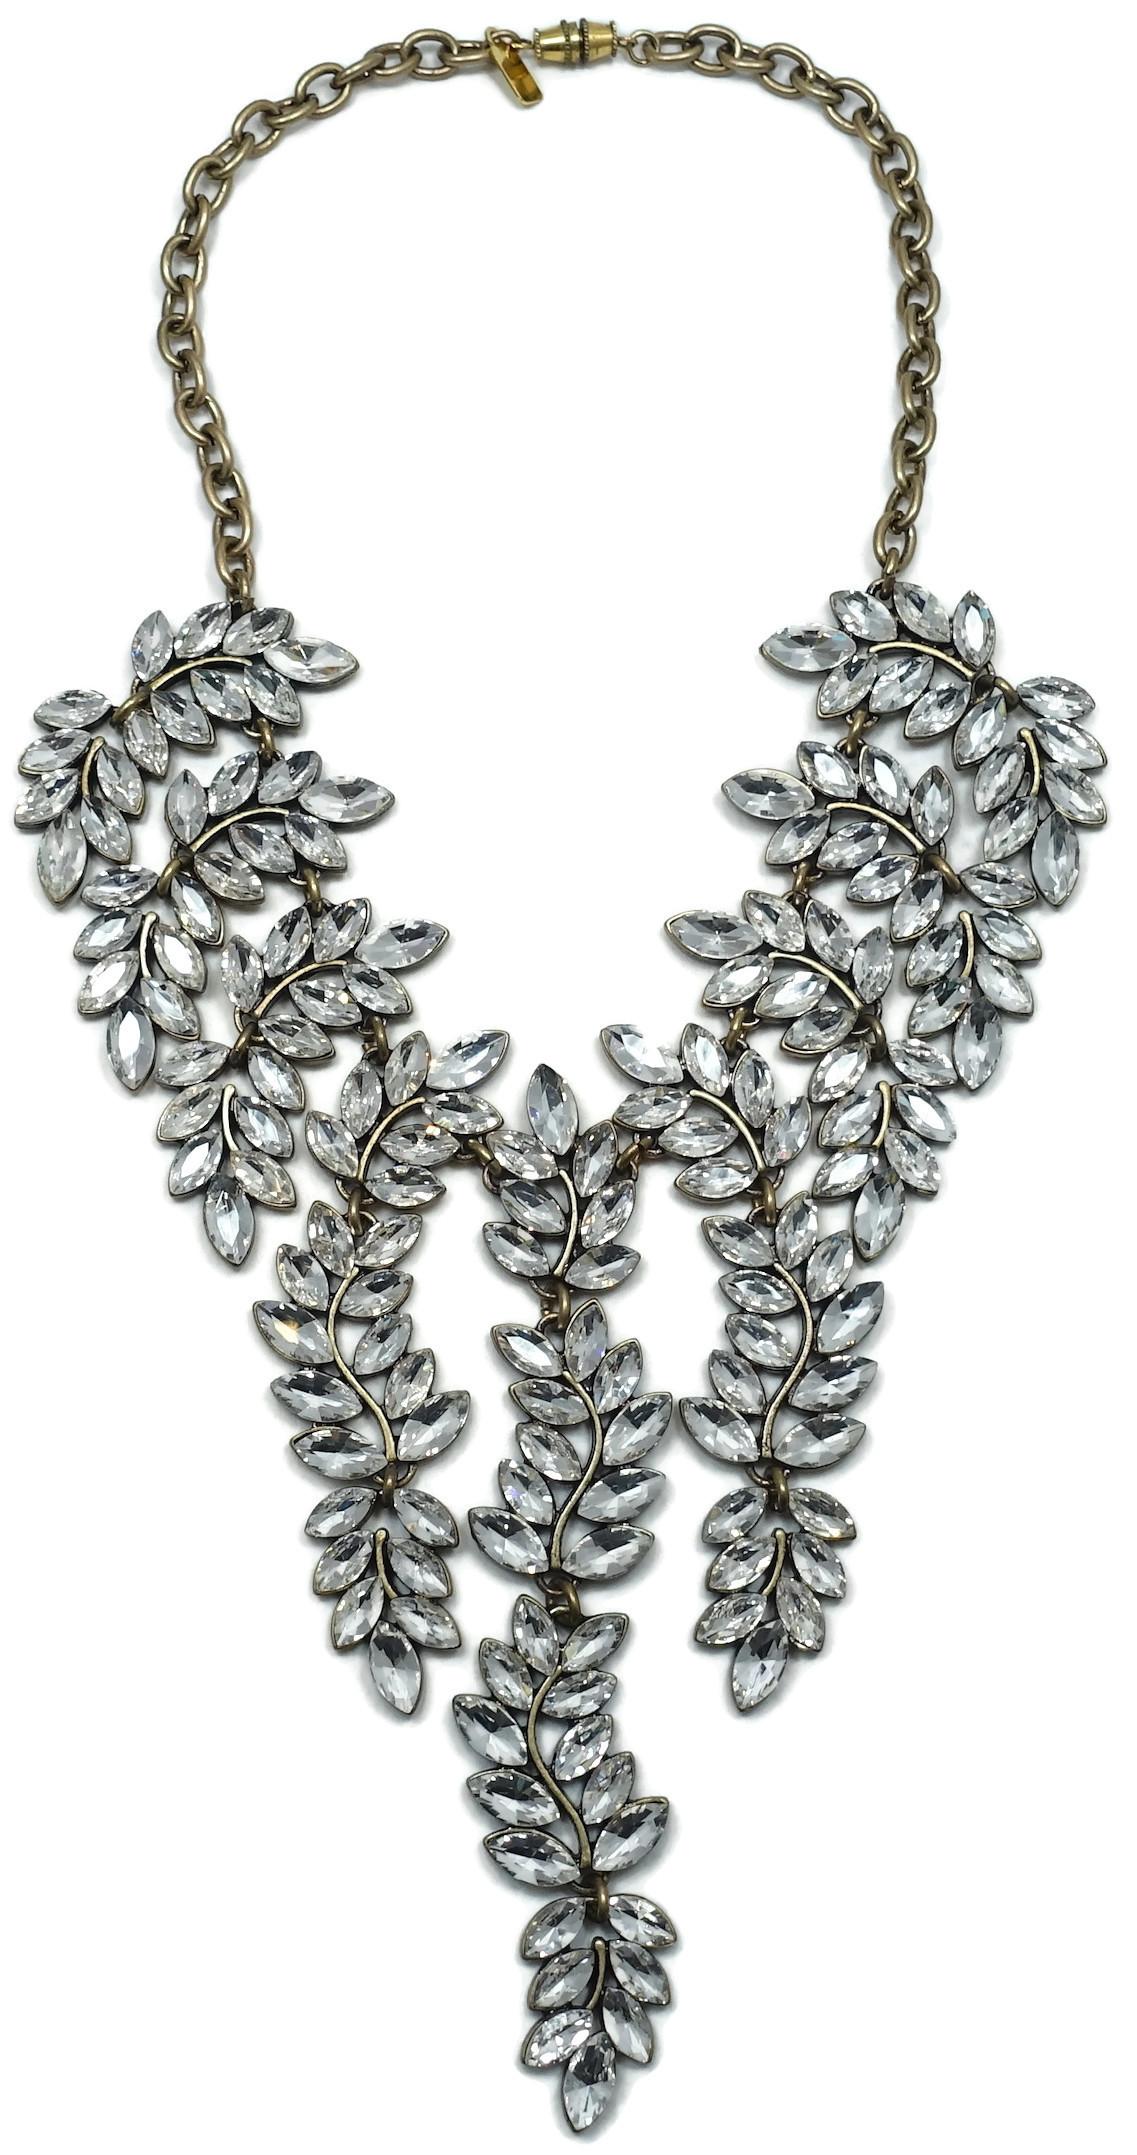 This famous signed Kenneth Lane necklace features multiple leaf drops with crystal accents in a gold tone setting.   This book piece necklace measures 16-1/2” long with a screw barrel closure; the center drop is 5-1/4” long x 1”.  In excellent